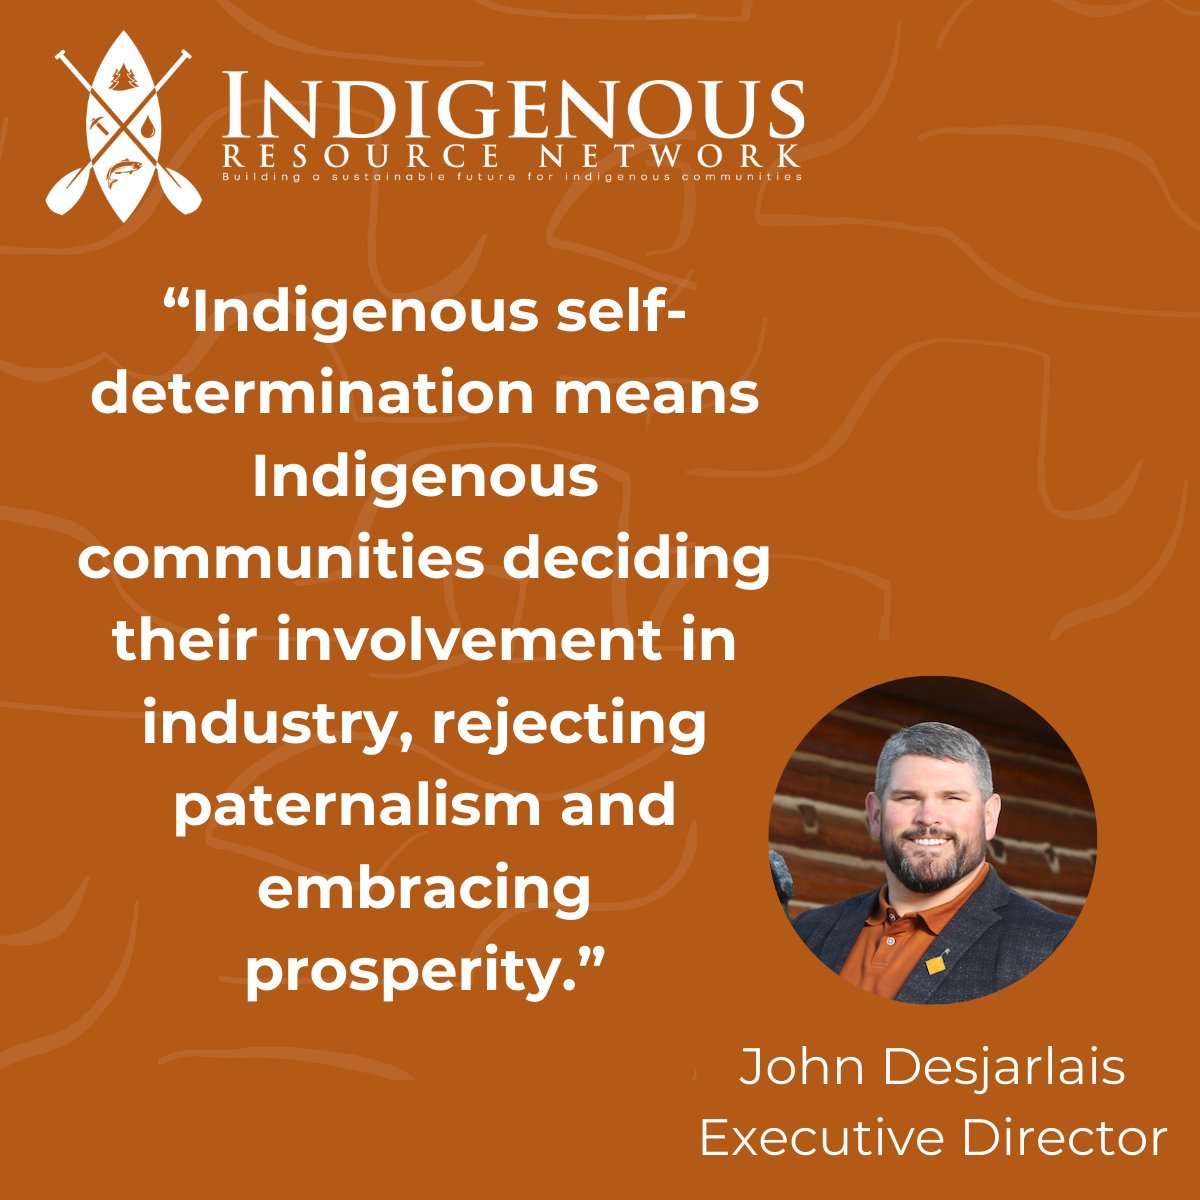 RT @IRN_Indigenous: #Indigenous engagement in the resource sector aims to foster opportunities with shared values. We should encourage more Indigenous participation in resource development.